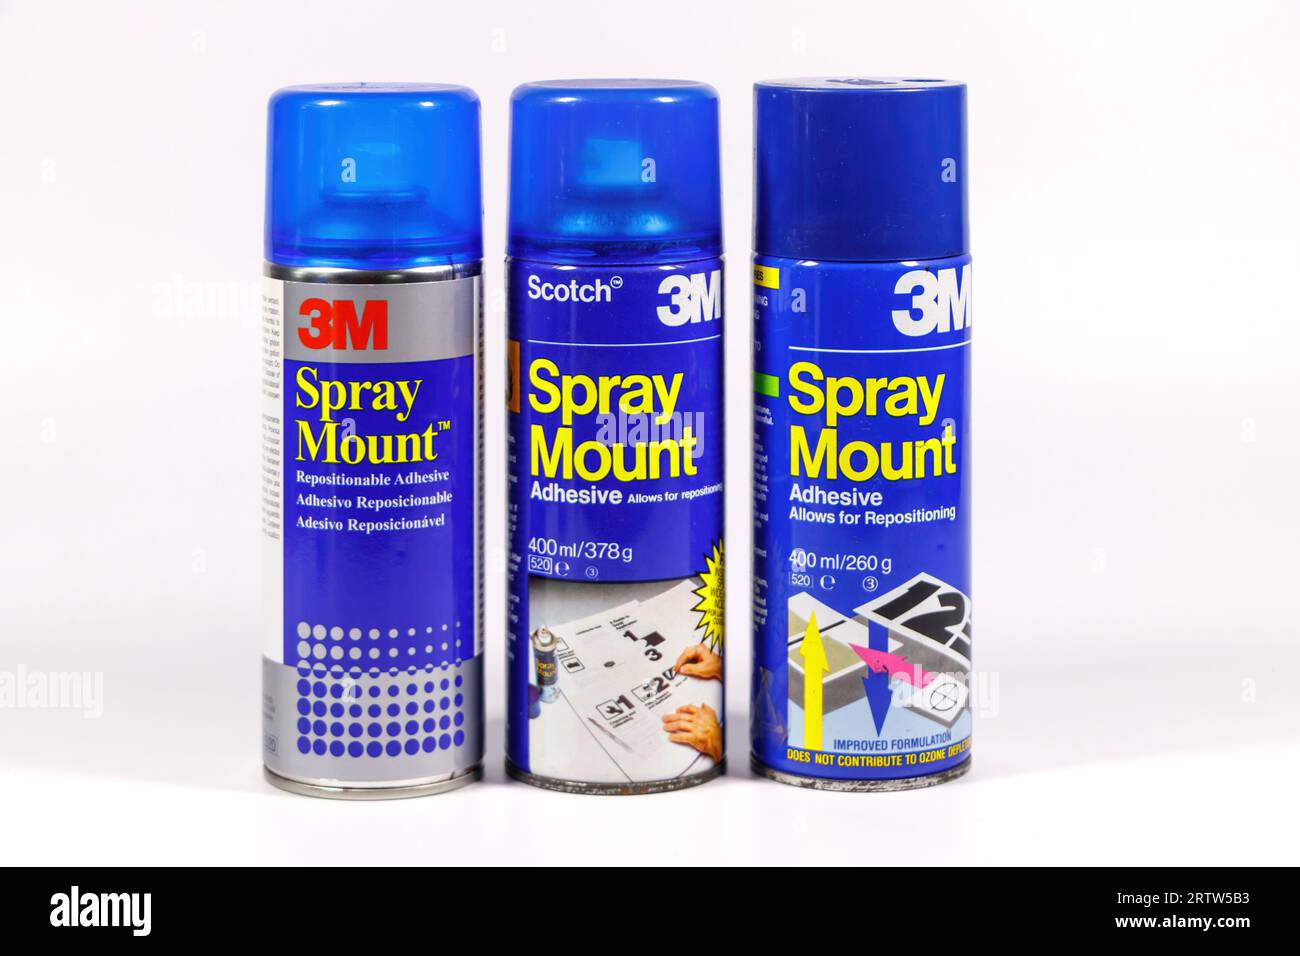 cans of old 3M spraymount spray adhesive for mounting photographs and design work Stock Photo